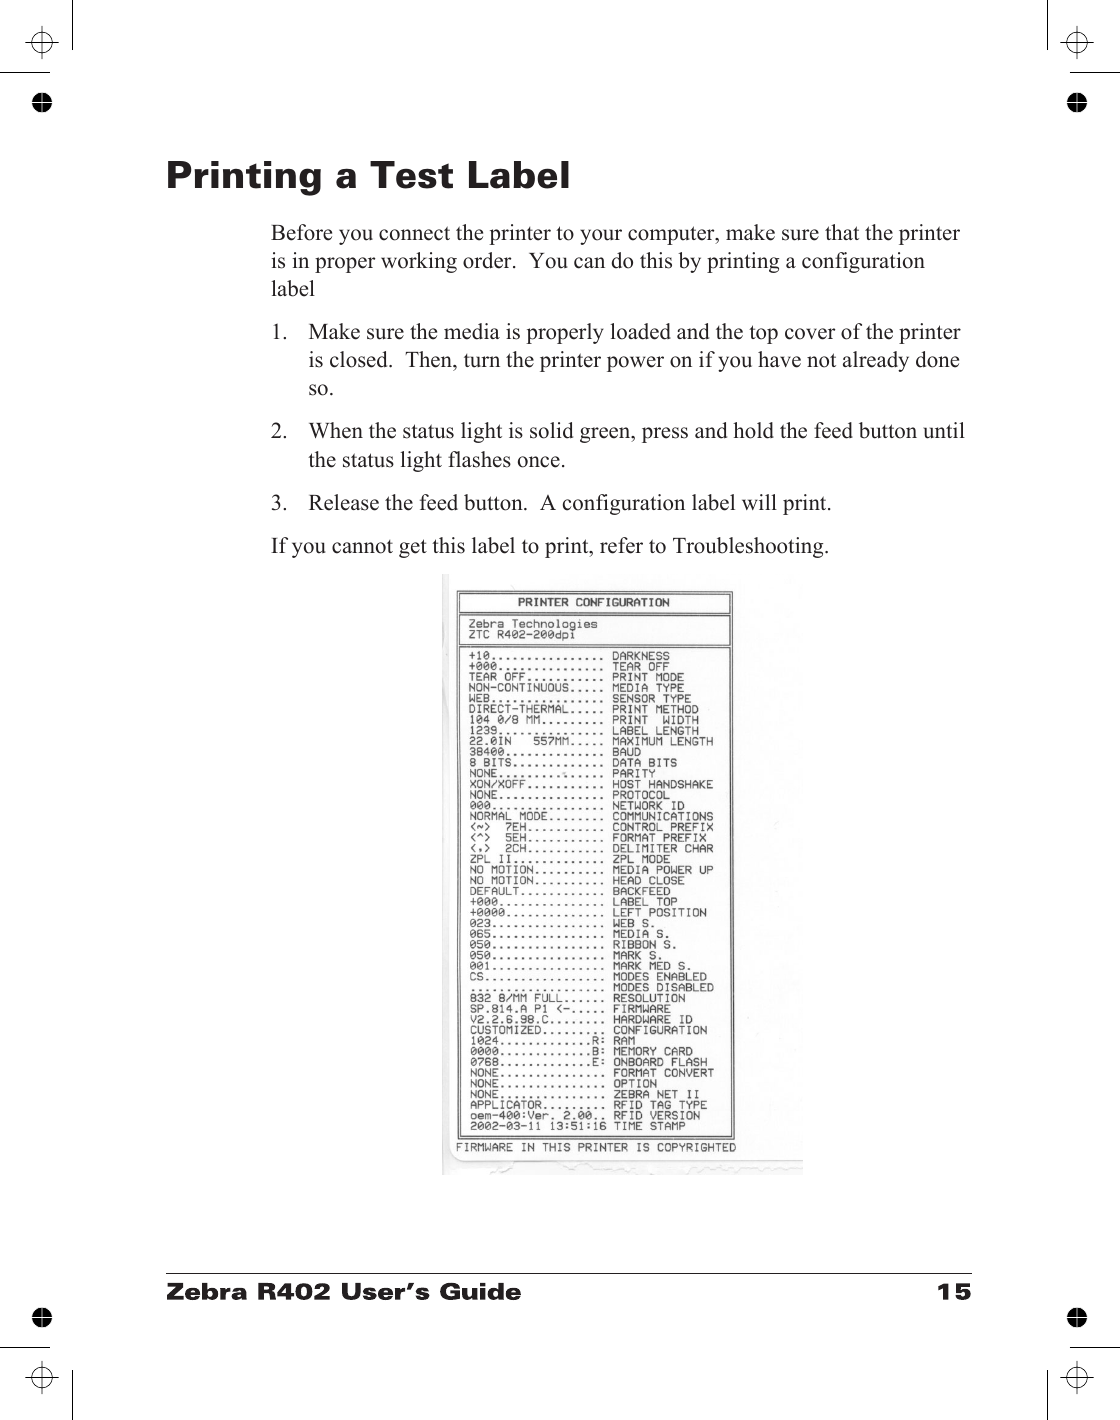 Printing a Test LabelBefore you connect the printer to your computer, make sure that the printeris in proper working order.  You can do this by printing a configurationlabel1. Make sure the media is properly loaded and the top cover of the printeris closed.  Then, turn the printer power on if you have not already doneso.2. When the status light is solid green, press and hold the feed button untilthe status light flashes once.3. Release the feed button.  A configuration label will print.If you cannot get this label to print, refer to Troubleshooting.